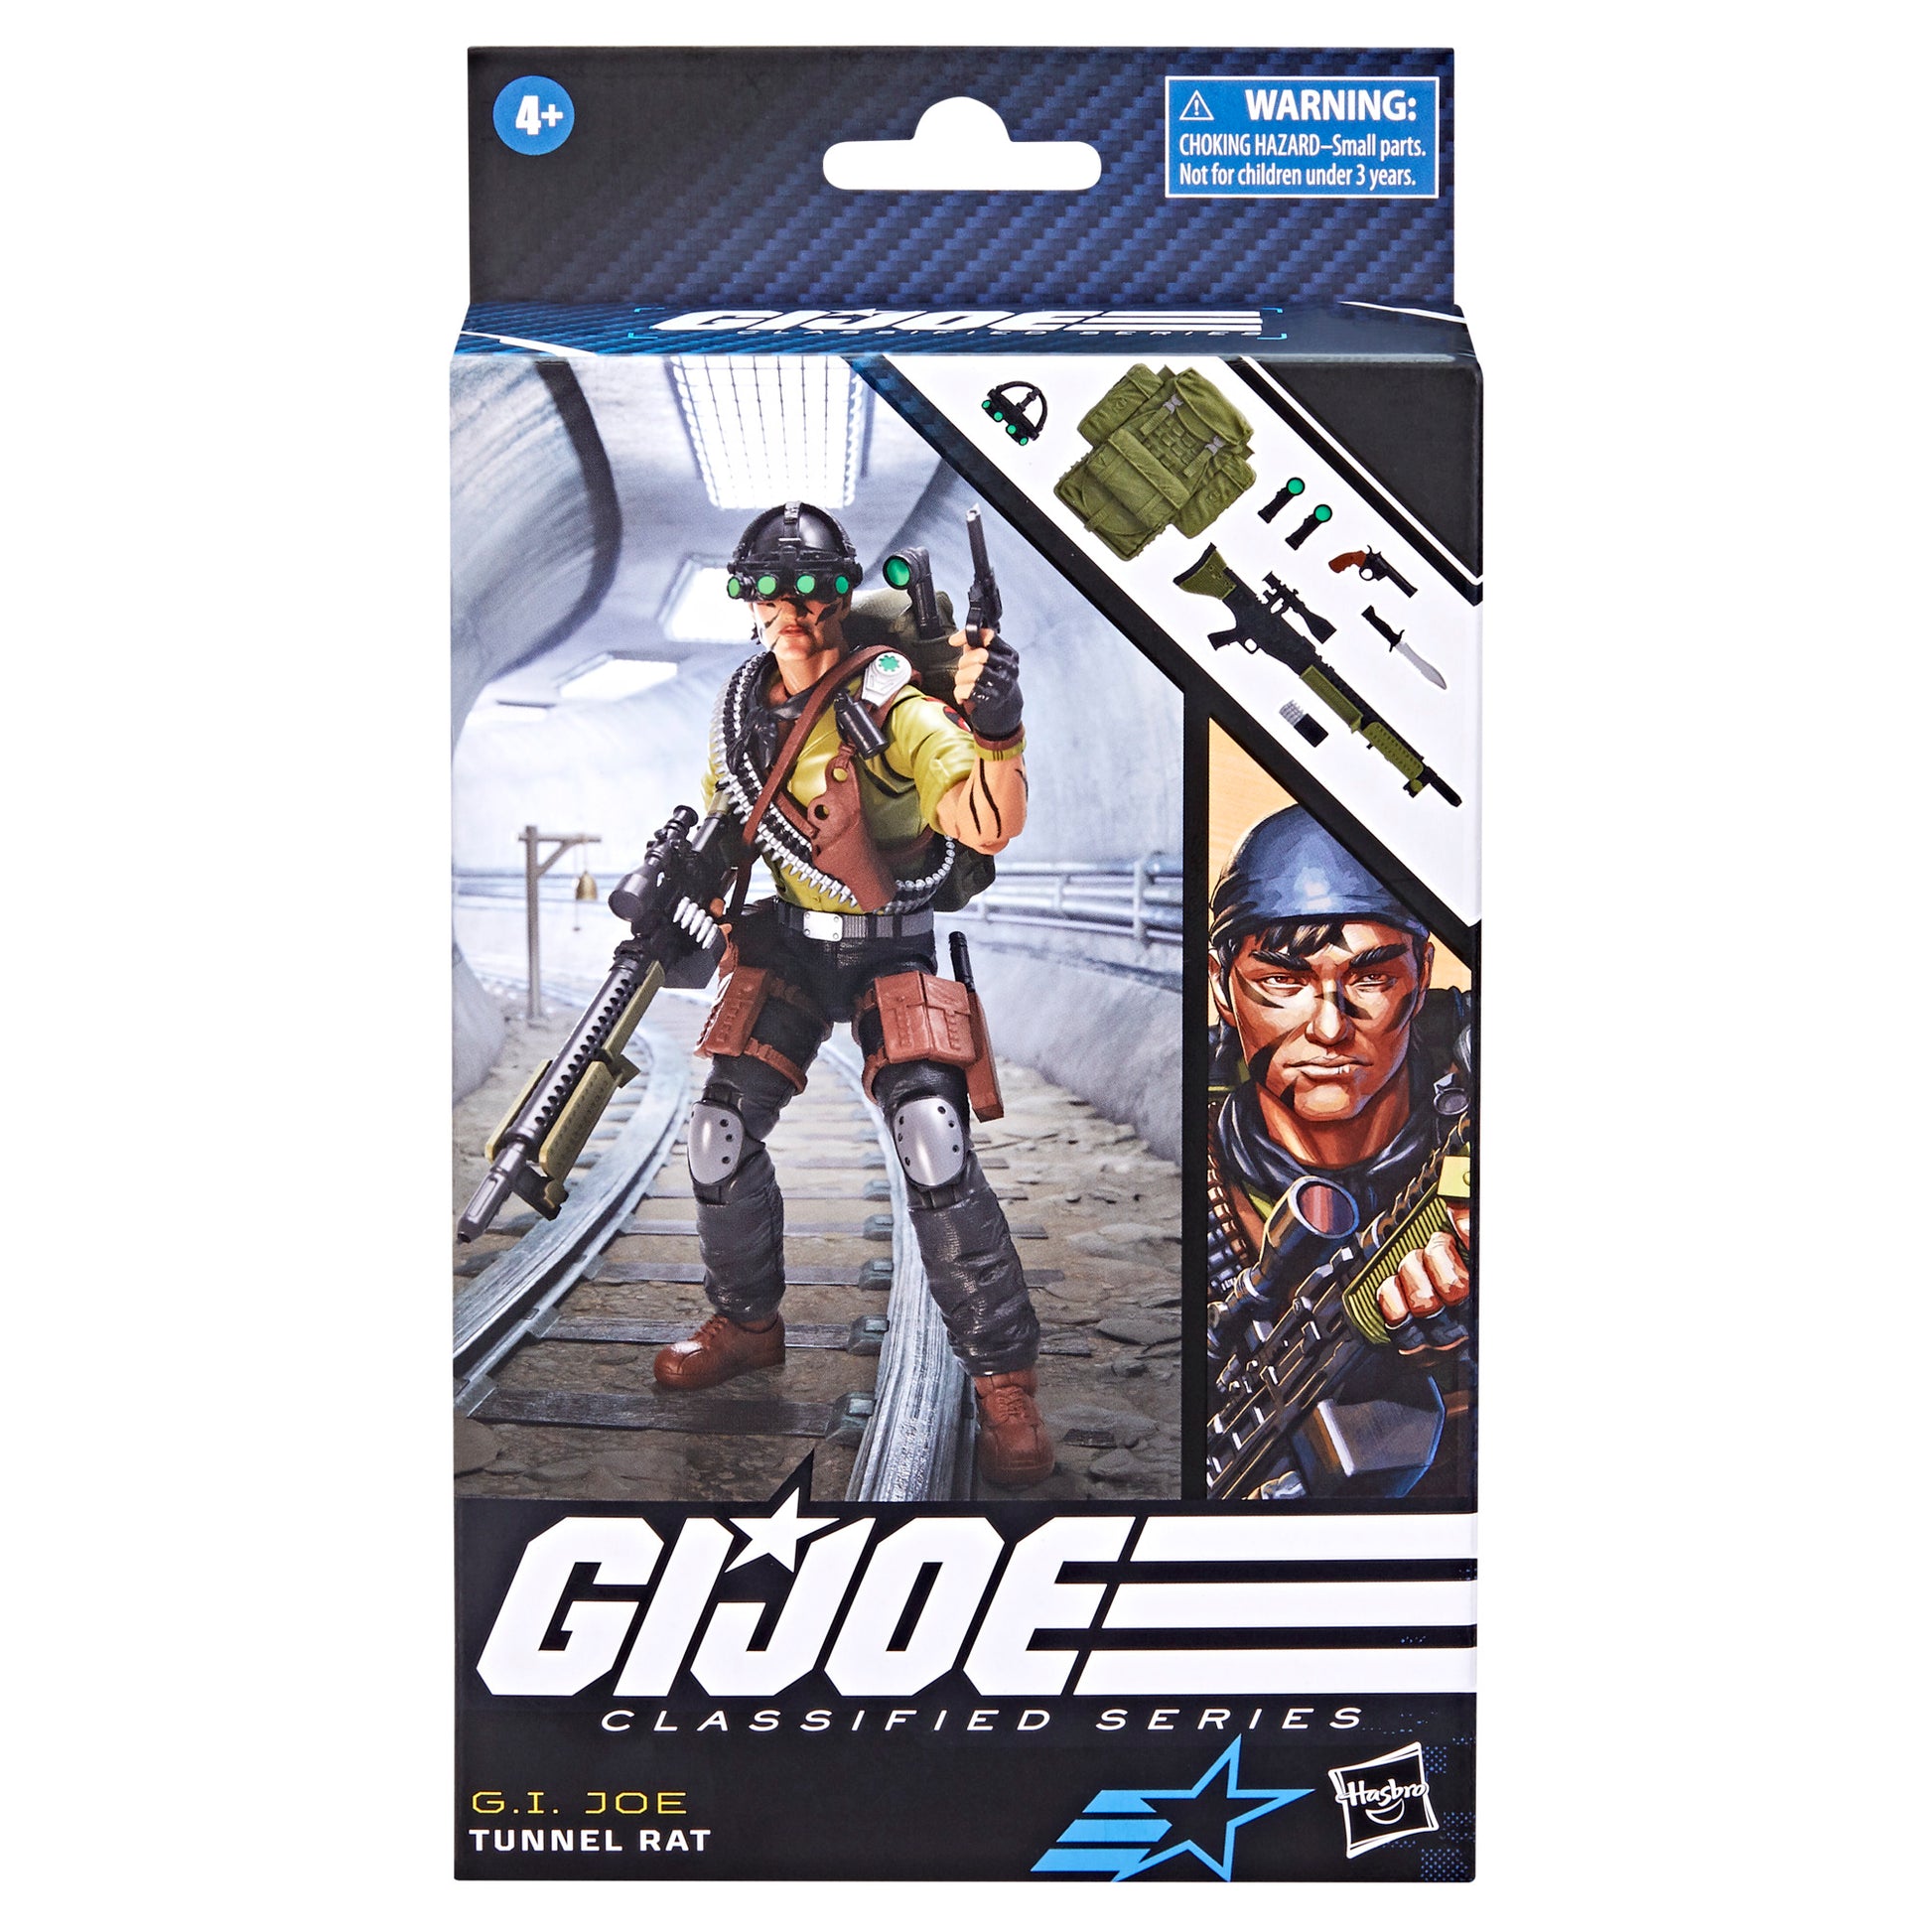 G.I. Joe Classified series tunnel Rat in a box front view - Heretoserveyou